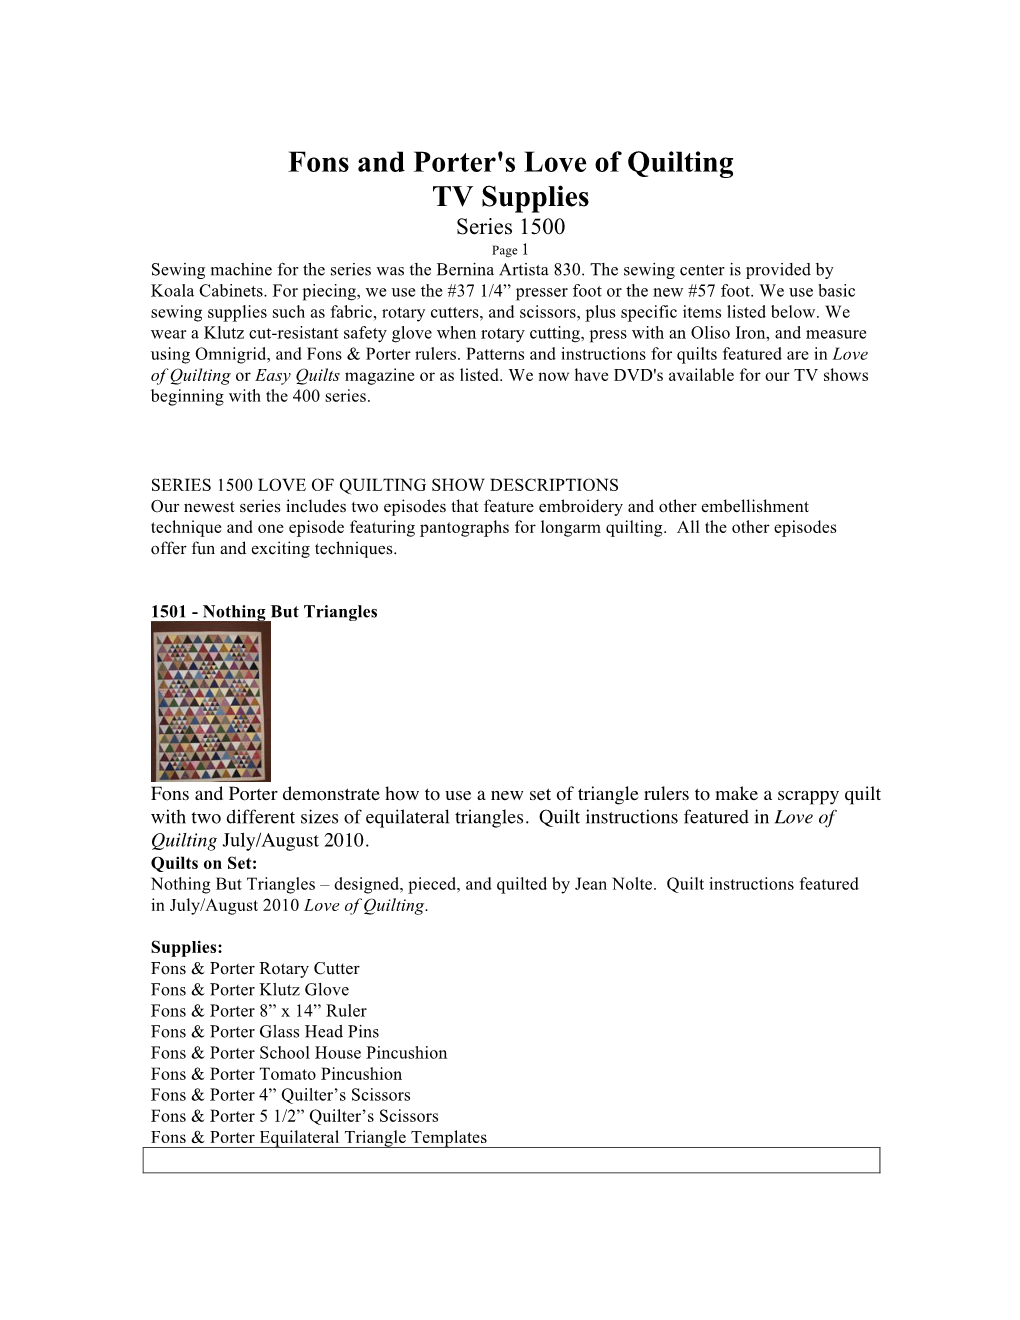 Fons and Porter's Love of Quilting TV Supplies Series 1500 Page 1 Sewing Machine for the Series Was the Bernina Artista 830